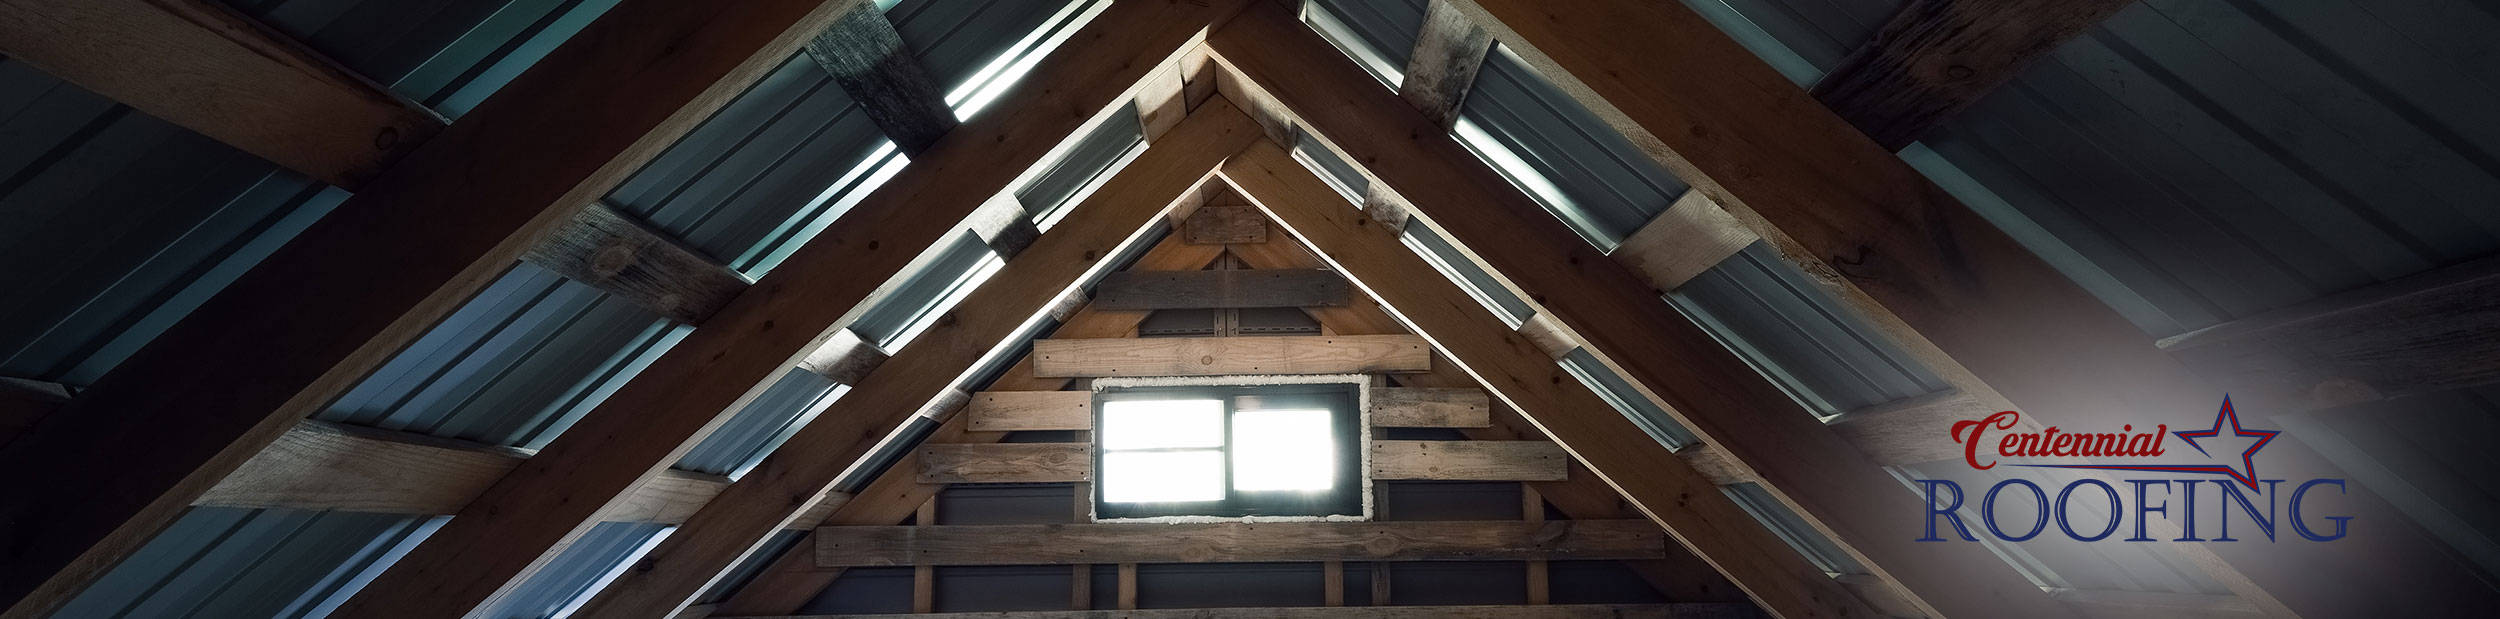 Fall Roof Maintenance - Check your attics insulation and ventilation